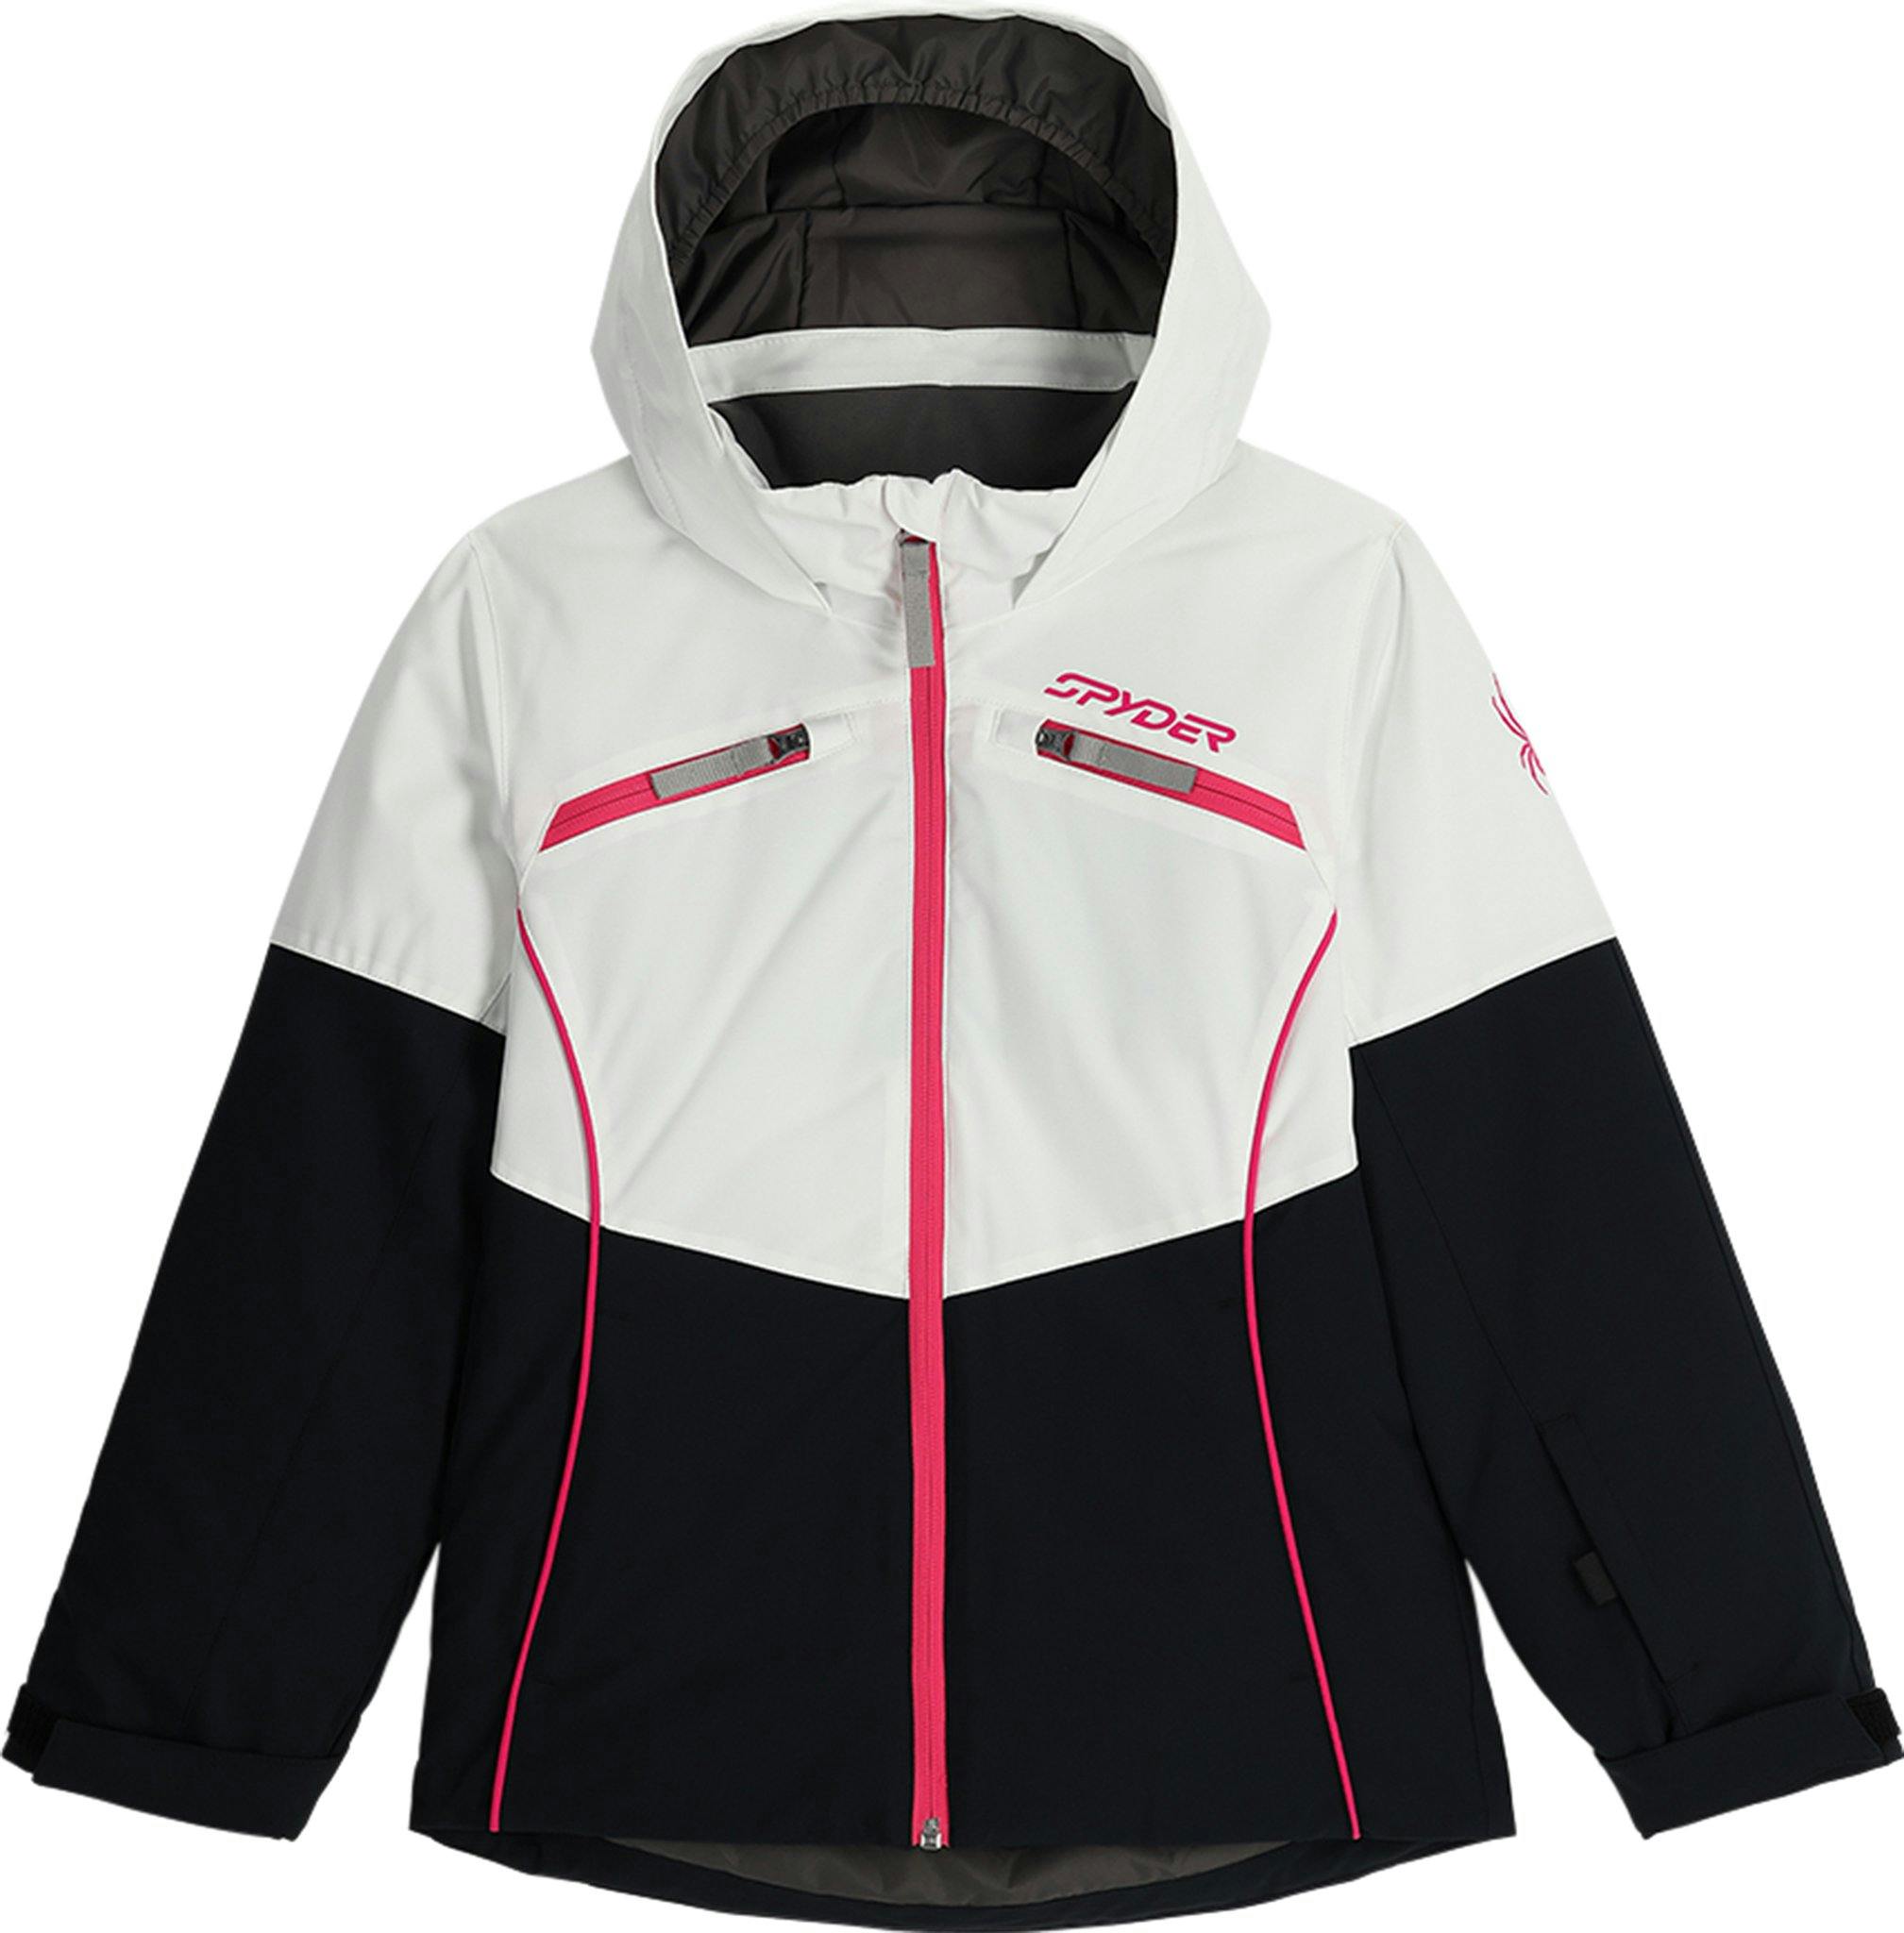 Product image for Camille Jacket - Girls